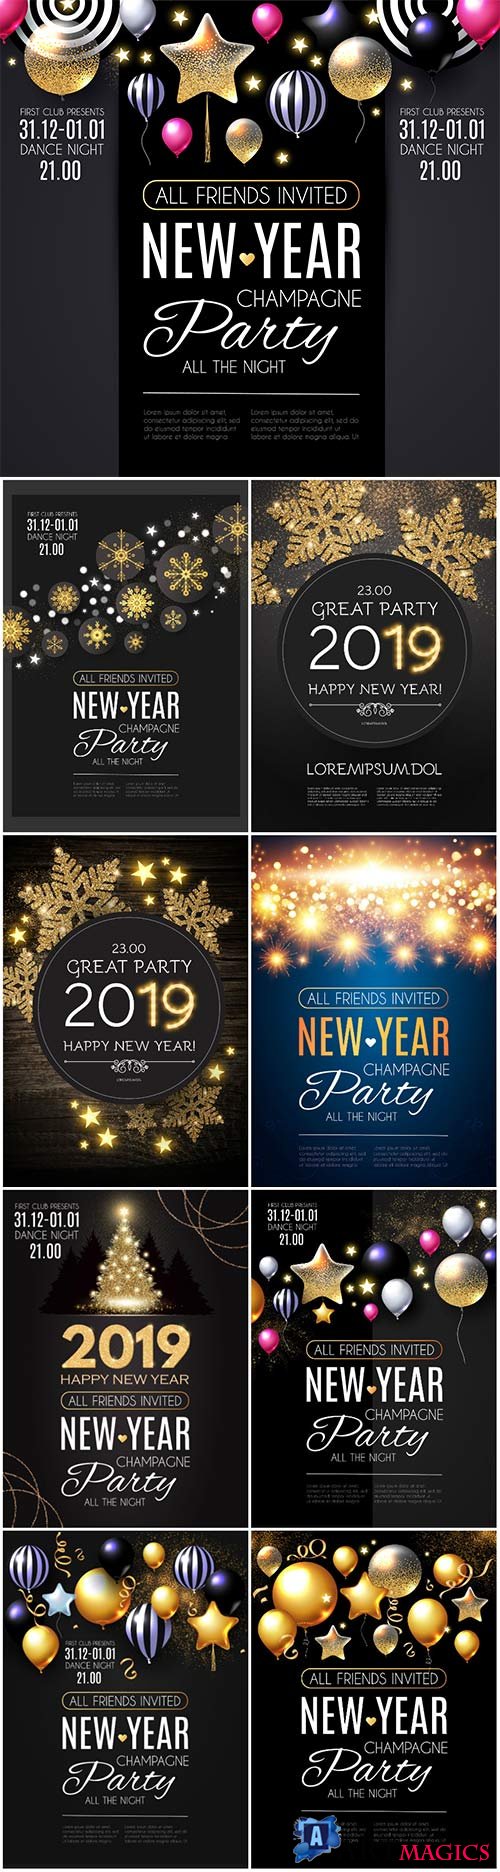 Happy New Year party poster vector template